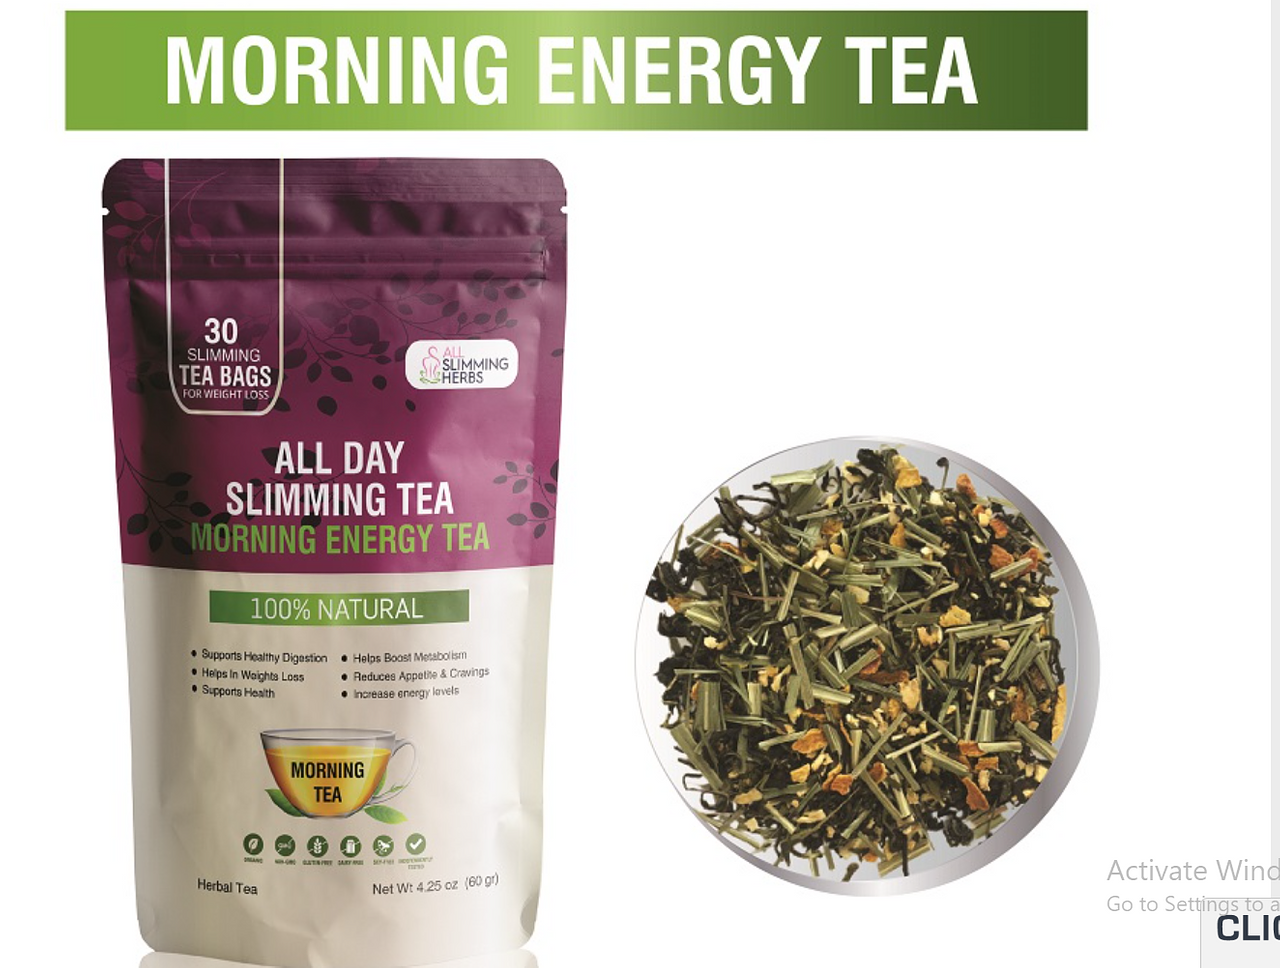 All Day Slimming Tea Reviews & Price In USA